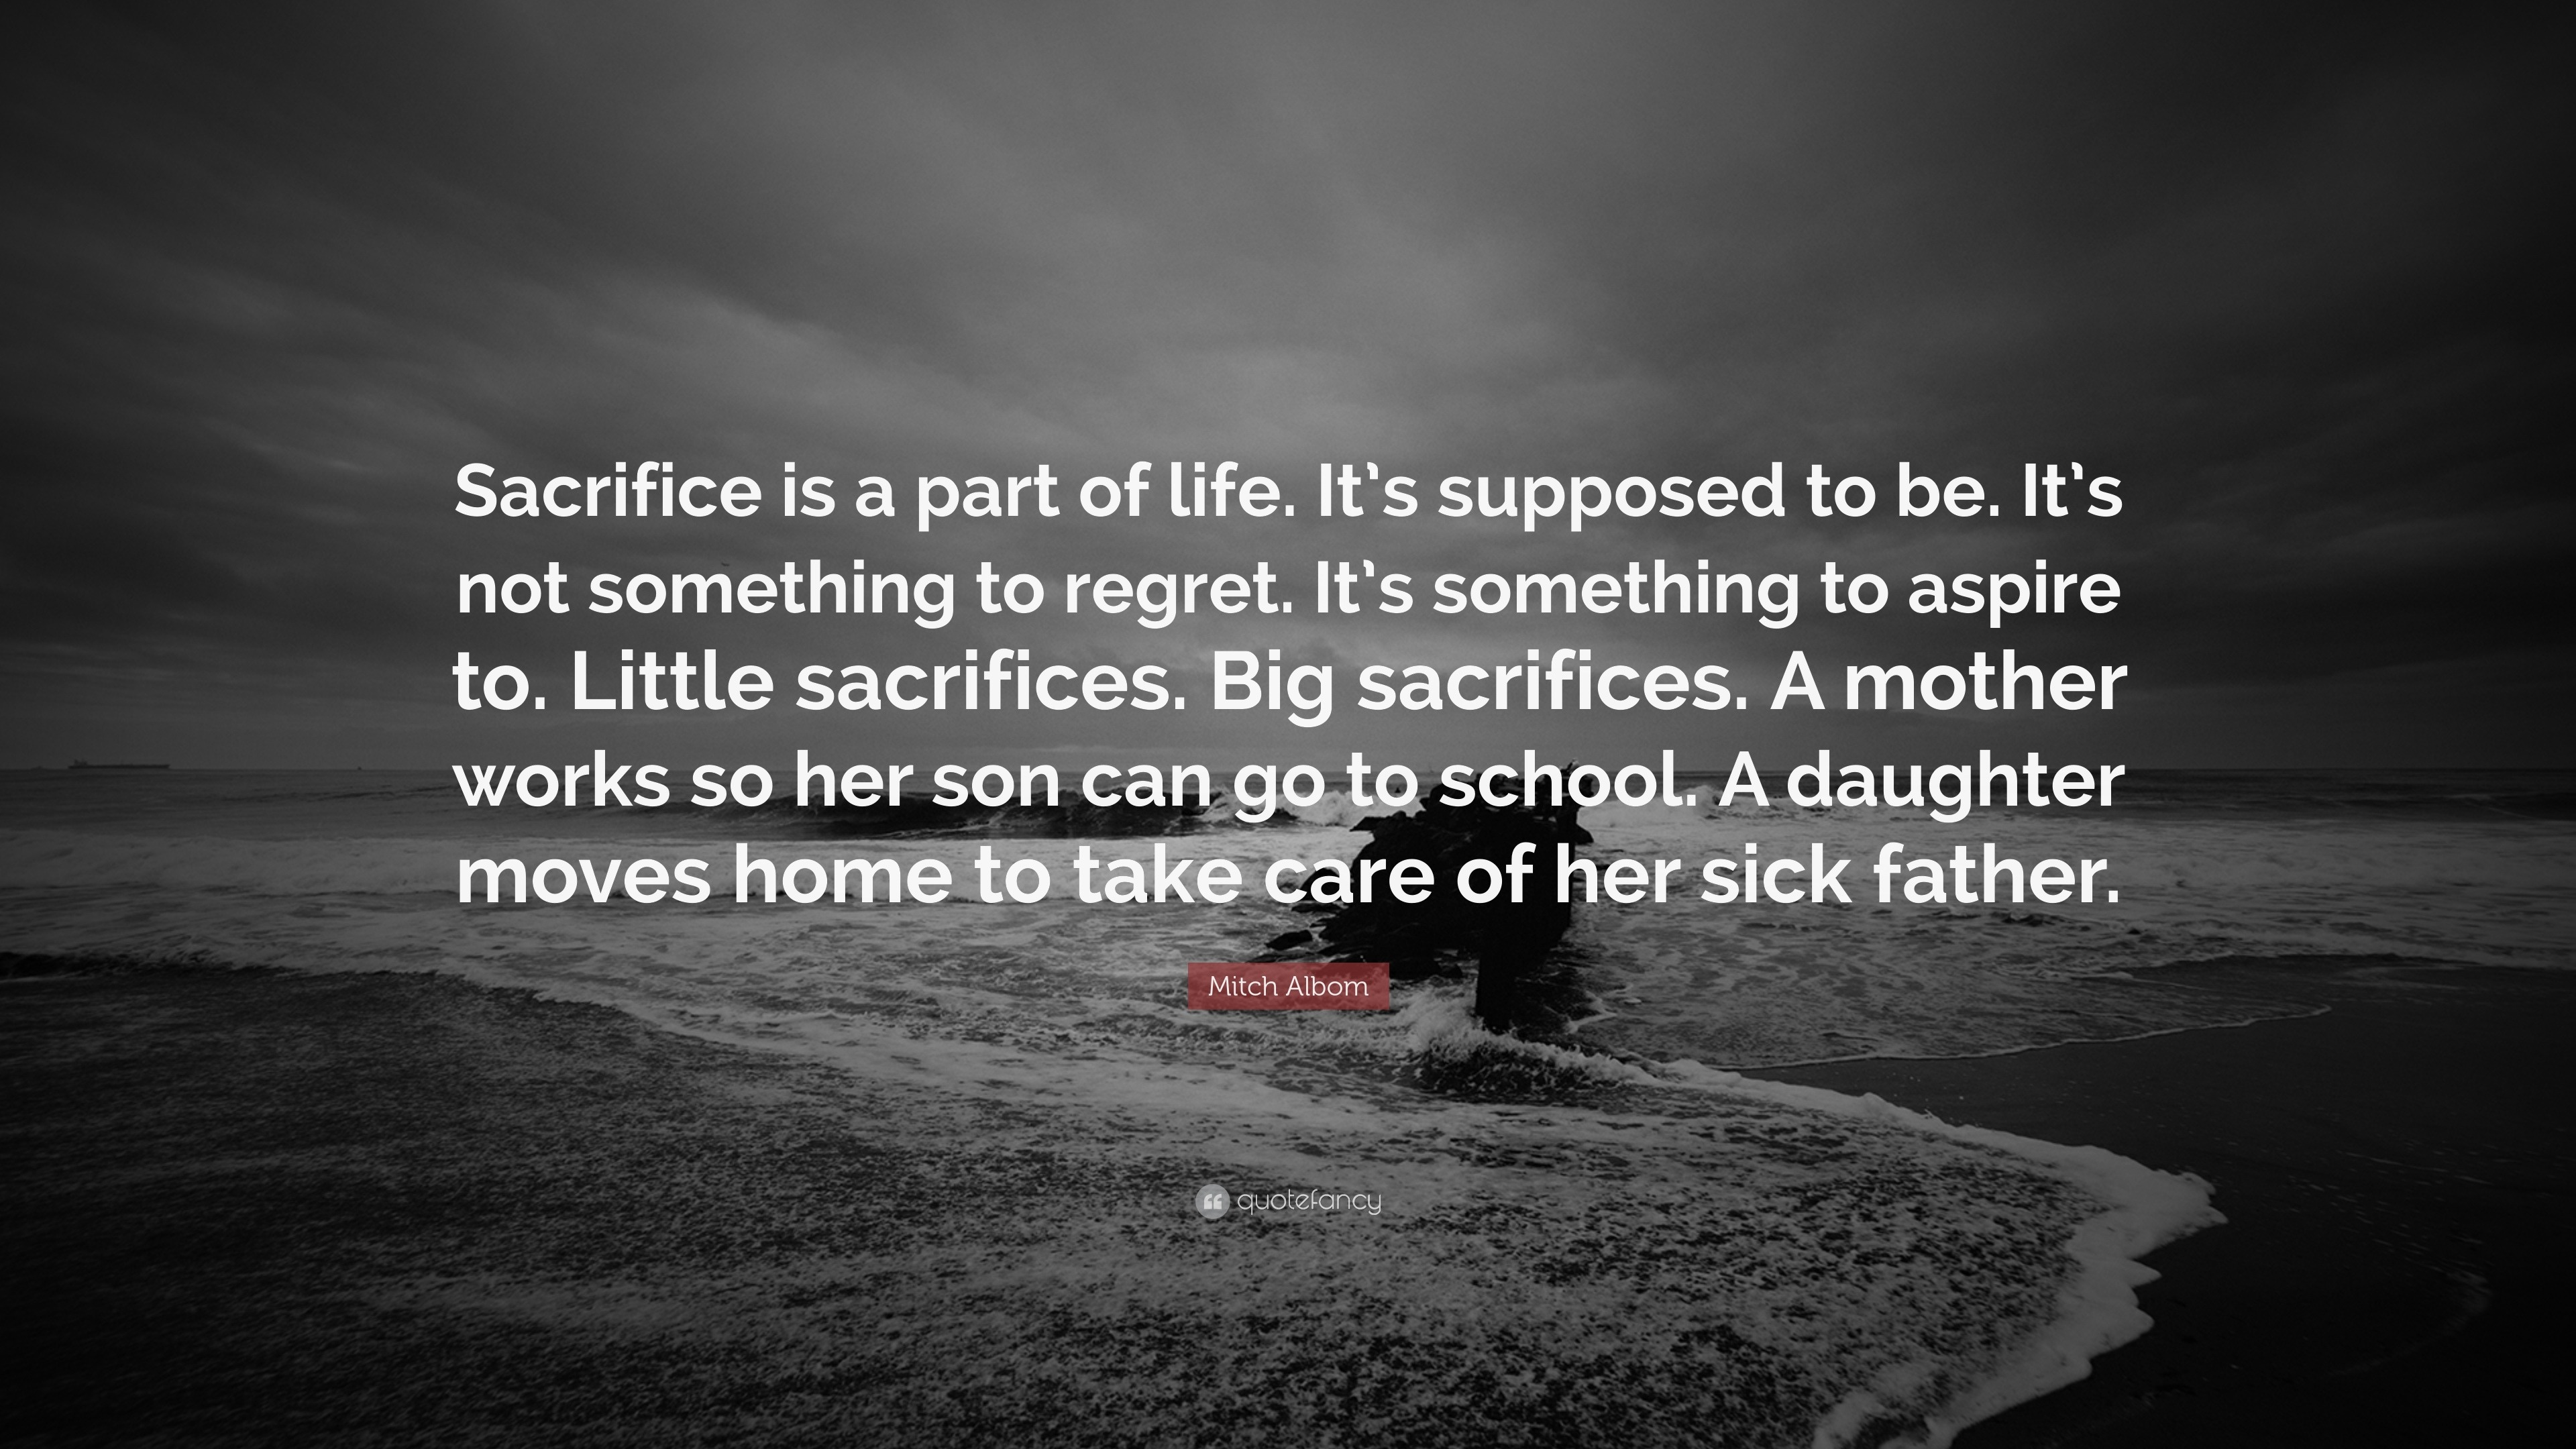 Regret Quotes “Sacrifice is a part of life It s supposed to be